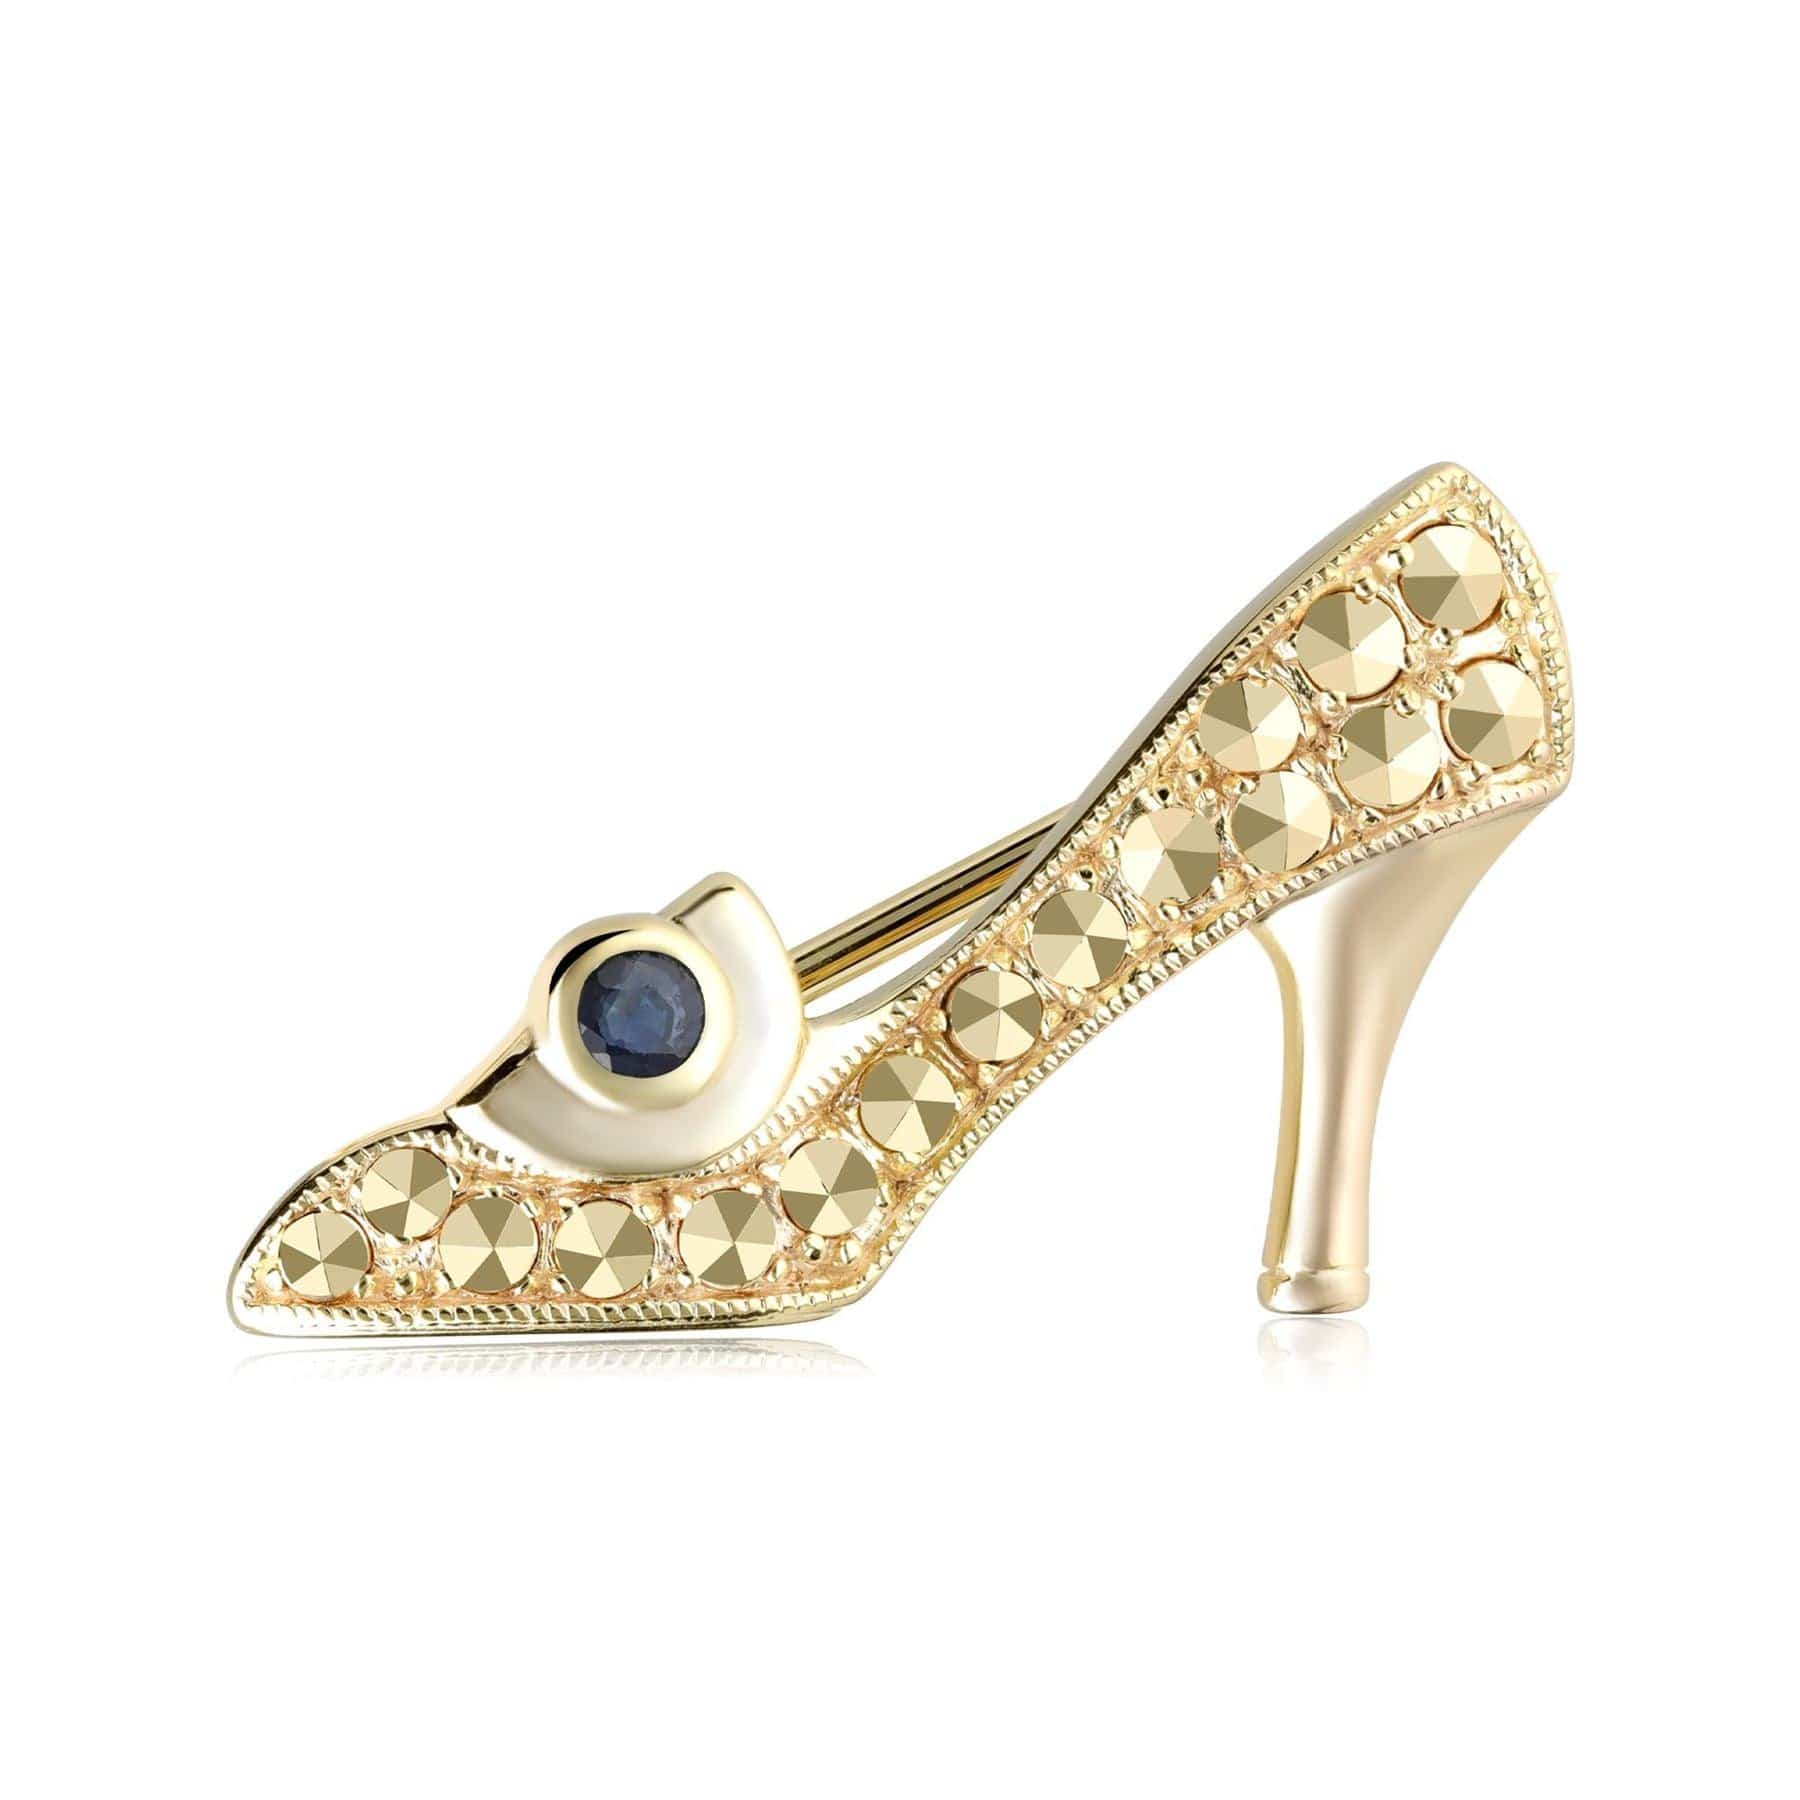 Image of Sapphire & Marcasite Shoe Brooch in 18ct Gold Plated Silver